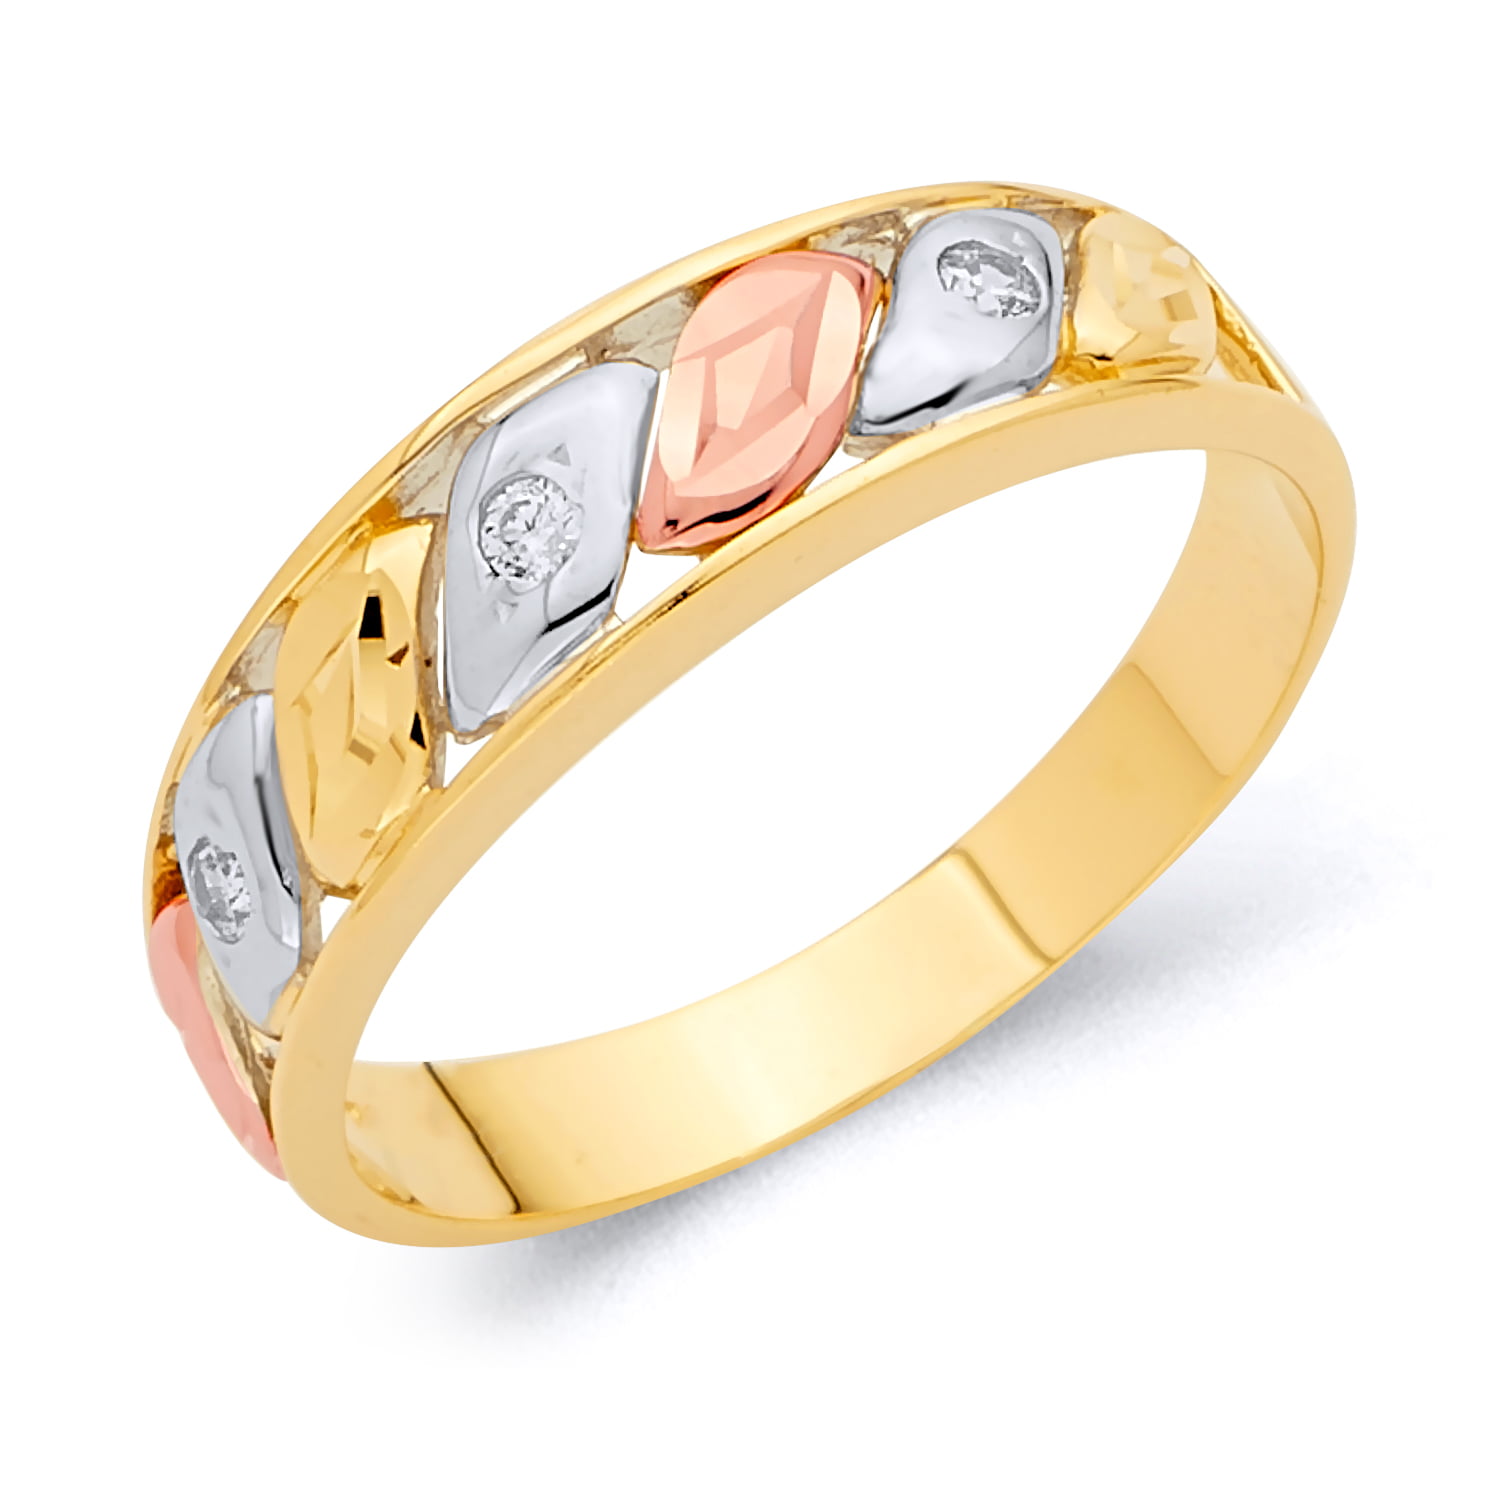 Wellingsale Mens 14K 3 Tri Color White Yellow and Rose/Pink Gold Polished CZ Cubic Zirconia Wedding Ring Band 